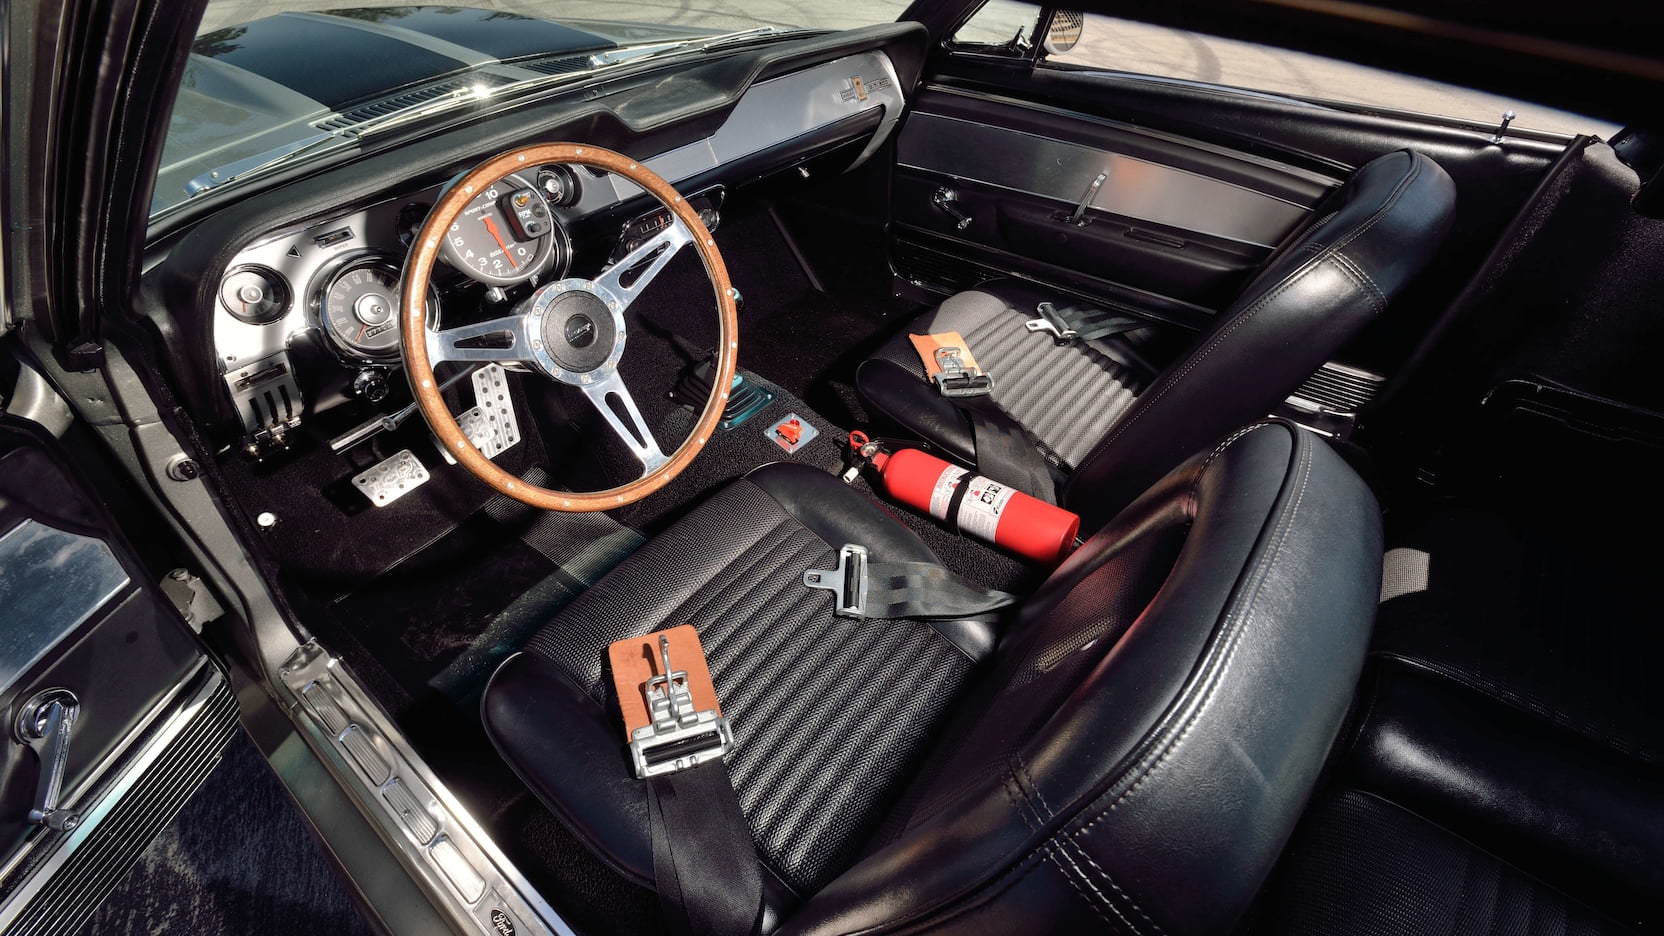 1967 Ford Mustang Shelby Gt500 Eleanor From Gone In 60